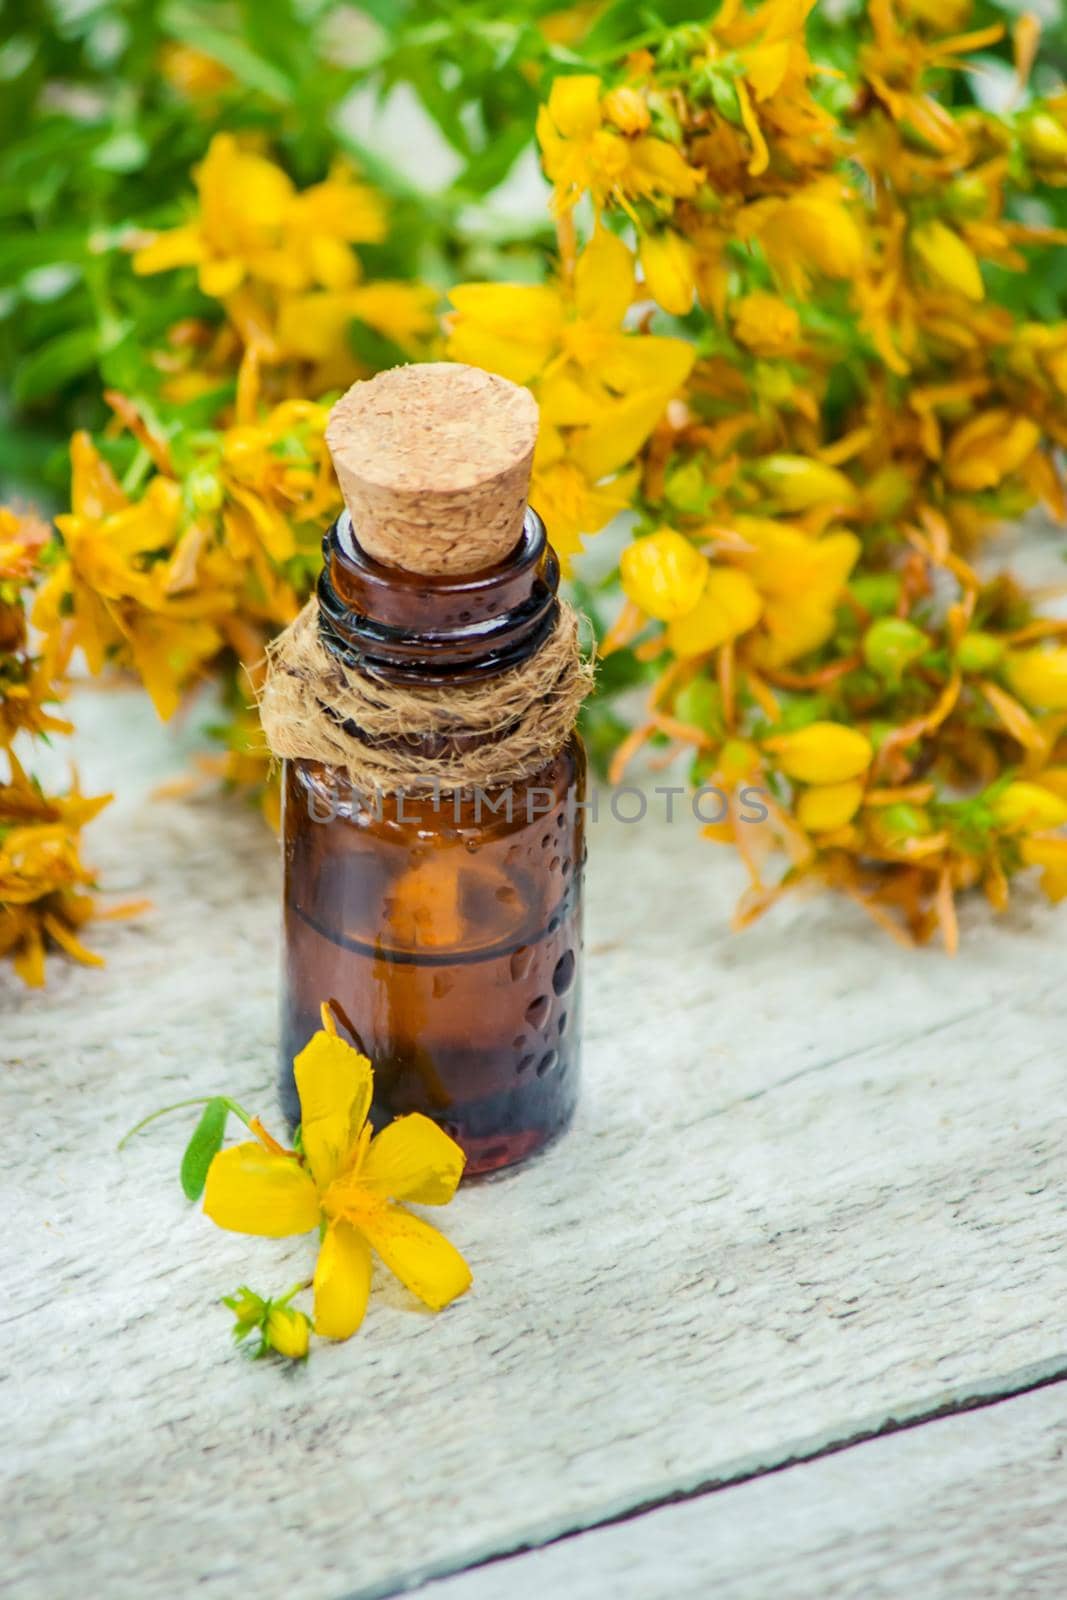 St. John's wort tincture in a small bottle.